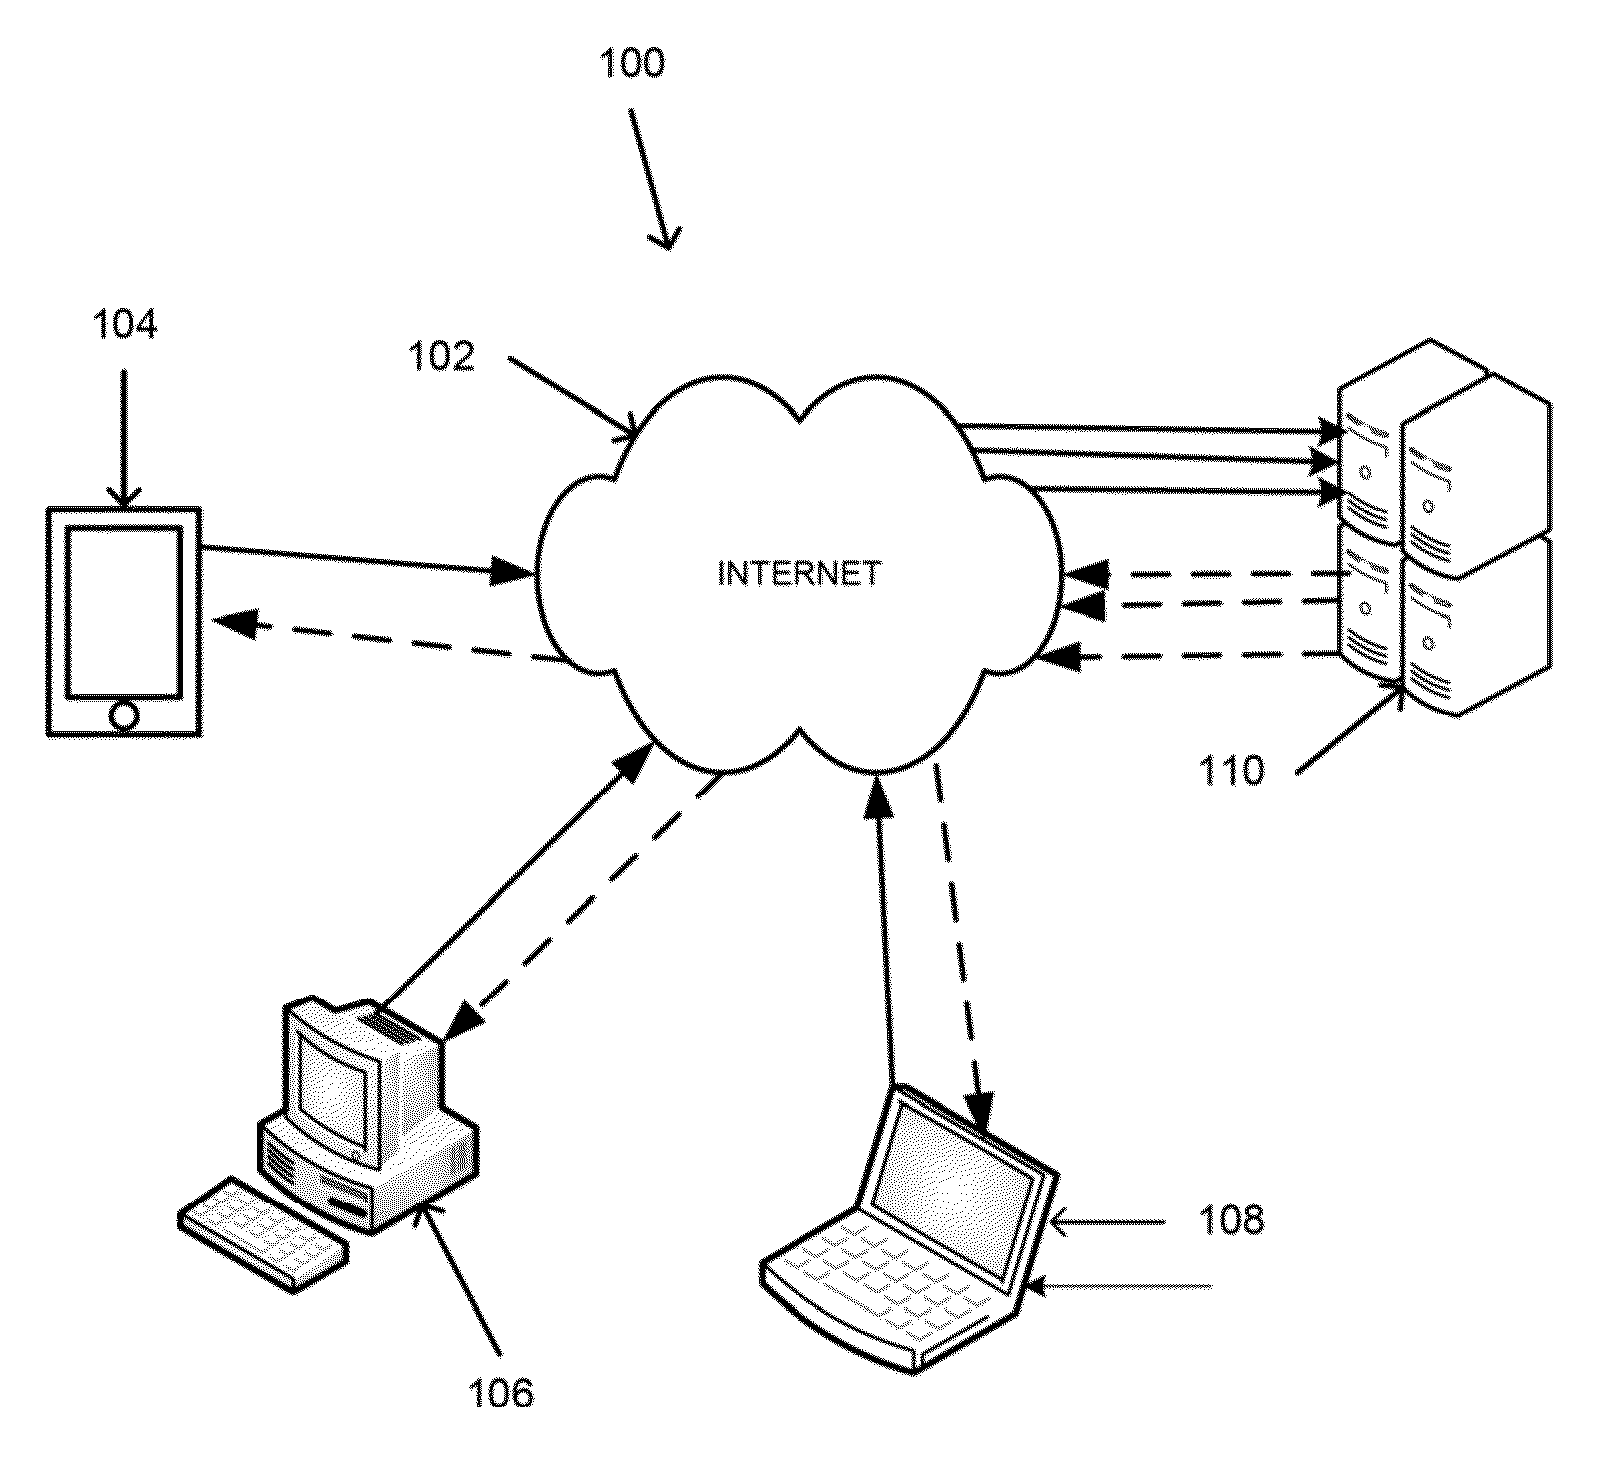 Automatic machine to machine distribution of subscriber contact information